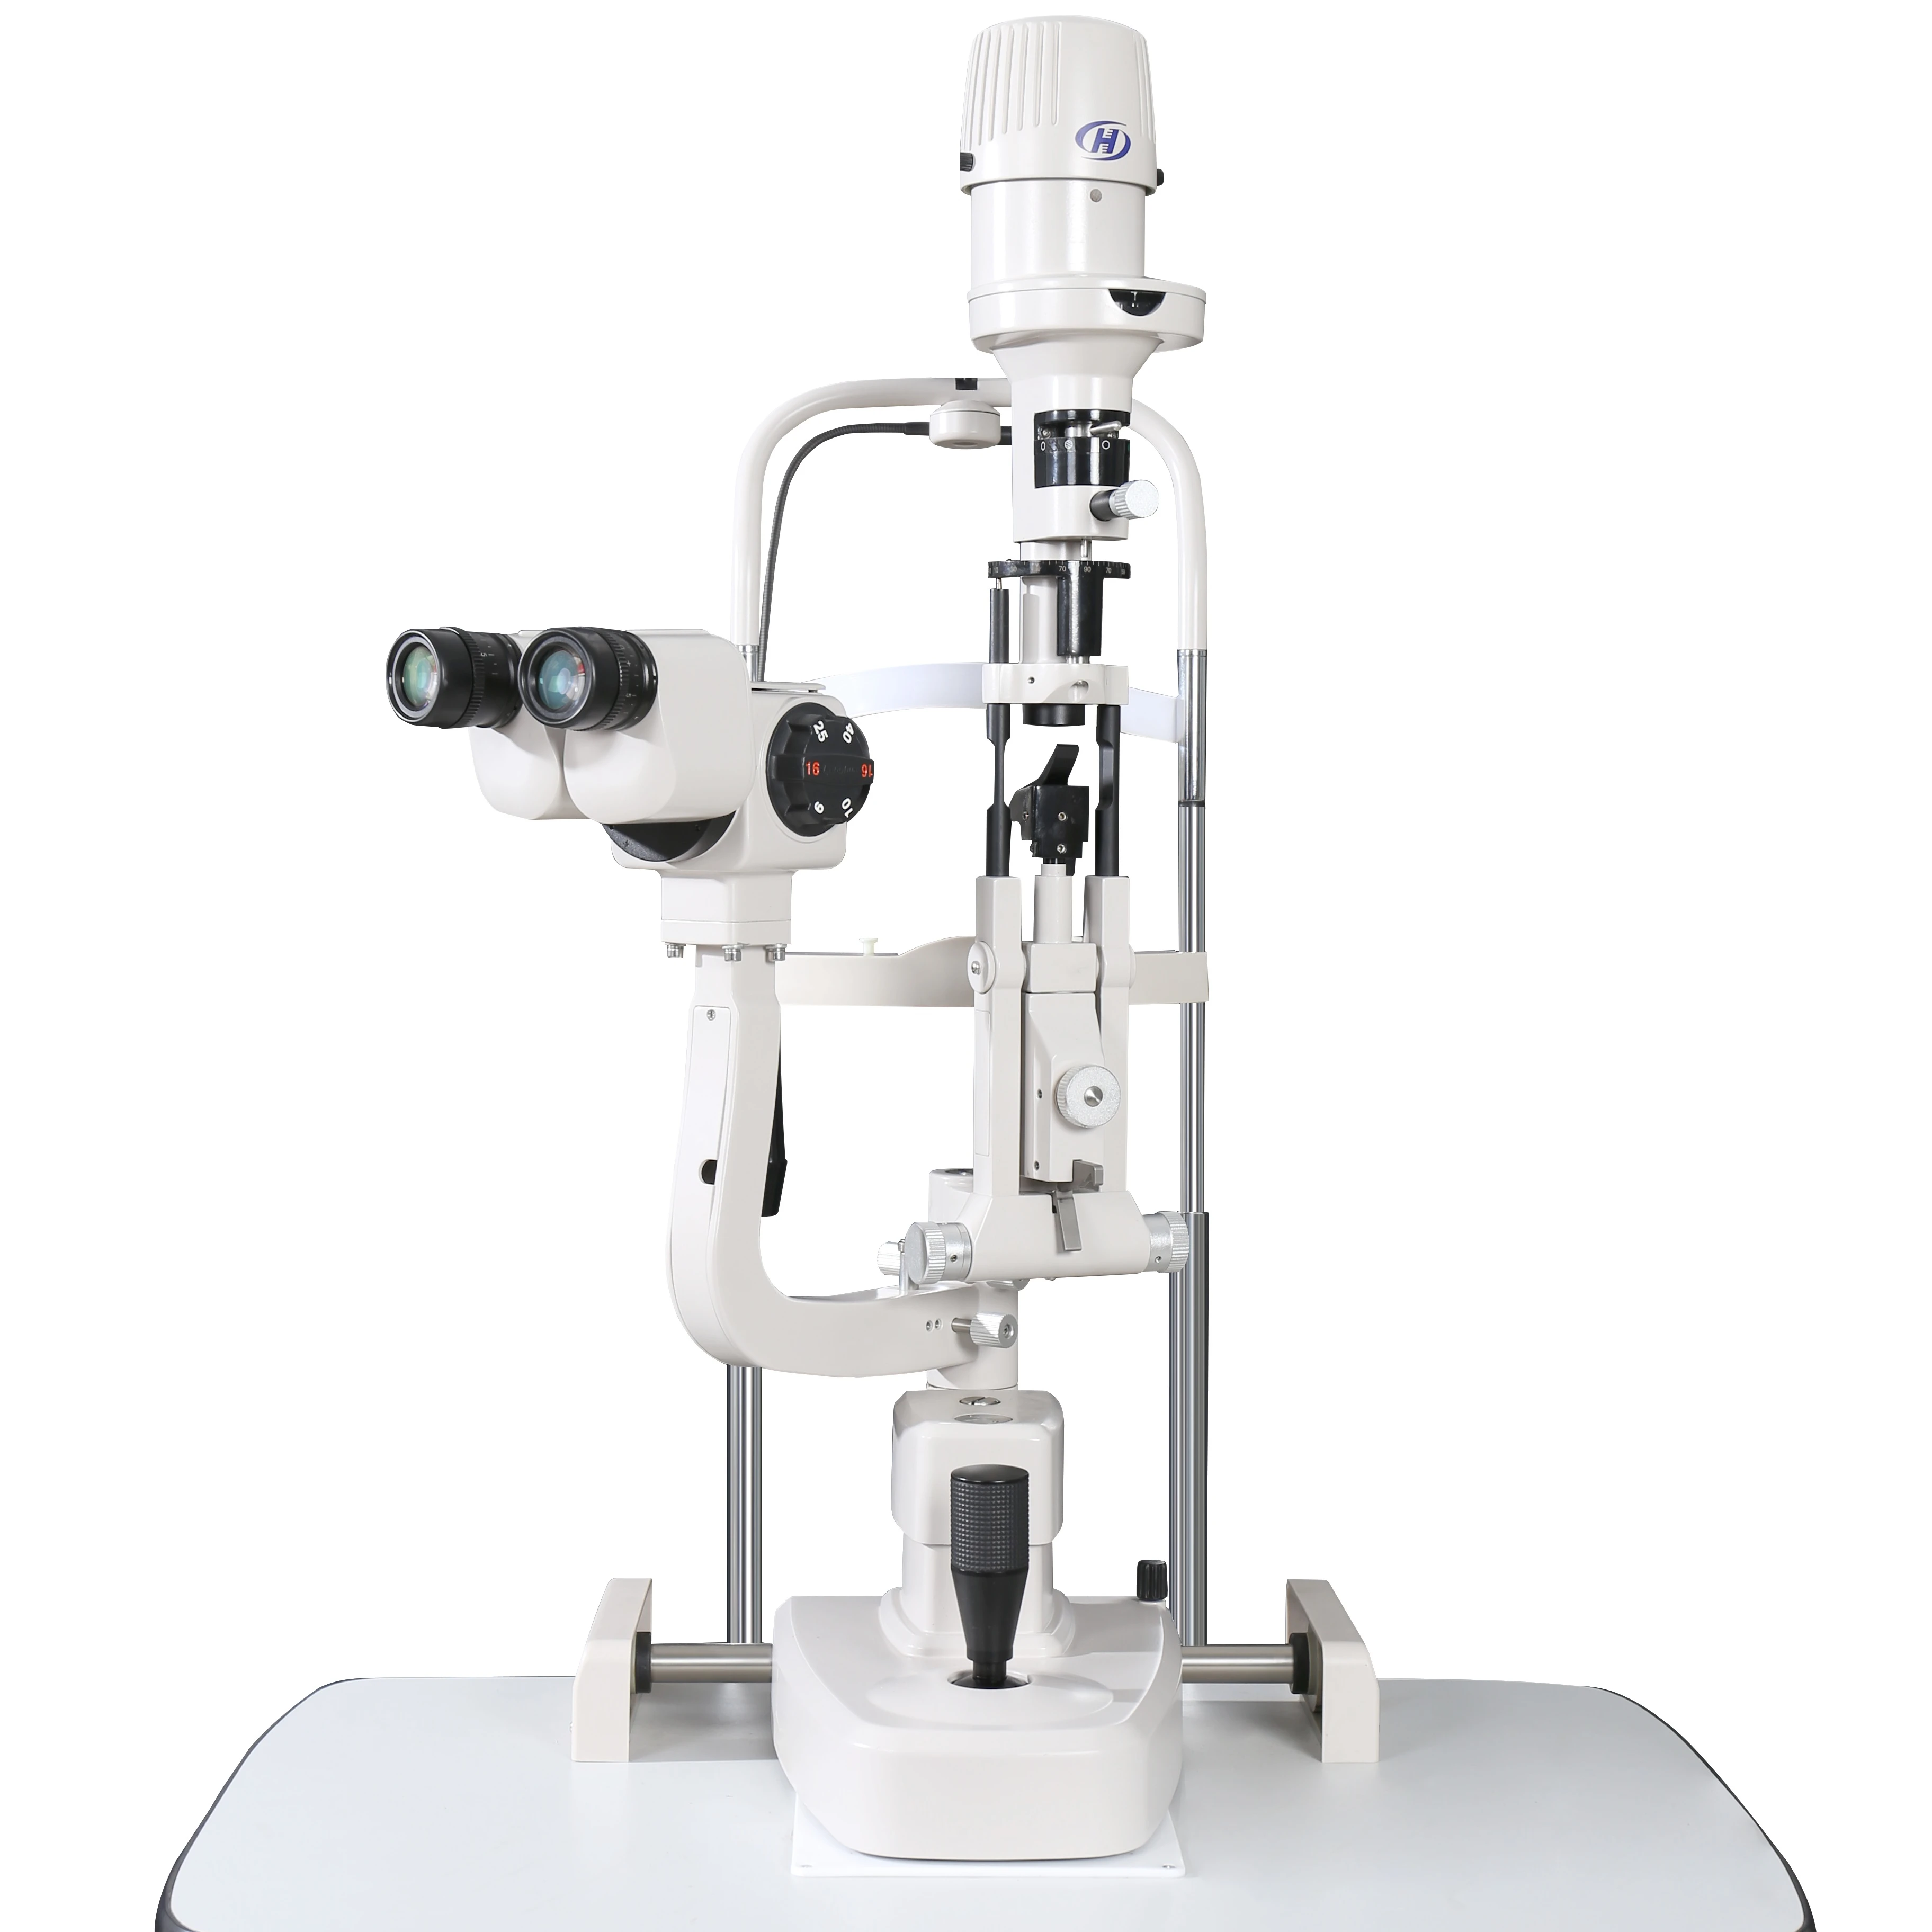 
Top Quality Kanghua 5 step slit lamp Ophthalmic Slit Lamp For Ophthalmology 